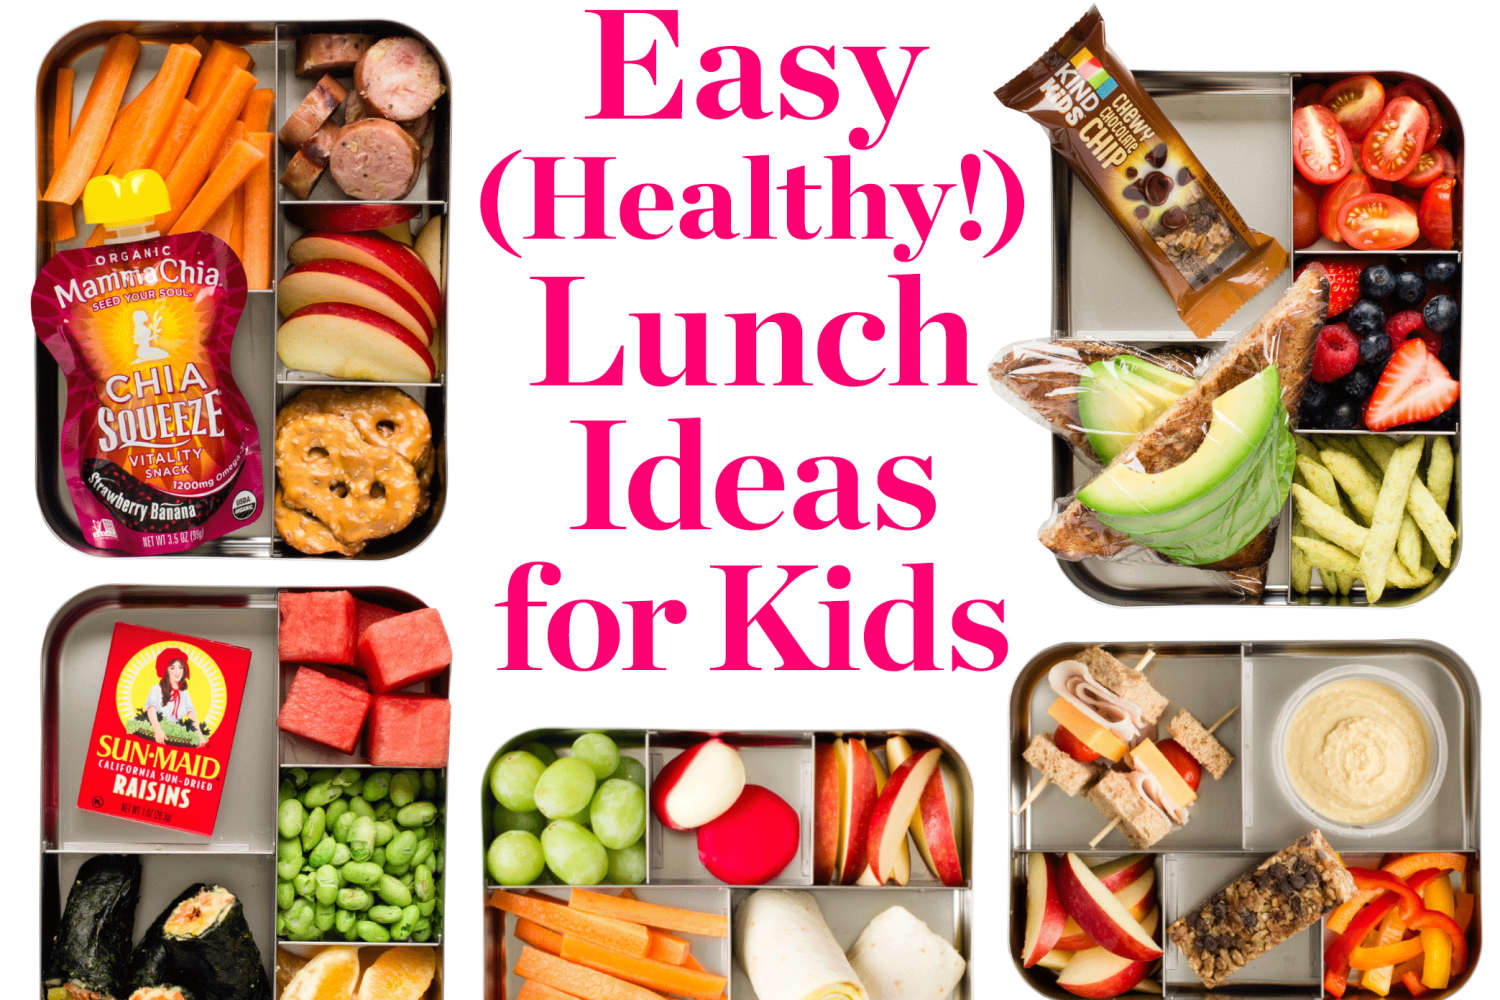 33 Delicious Lunch Box Snack Ideas for Kids - Teaching Expertise